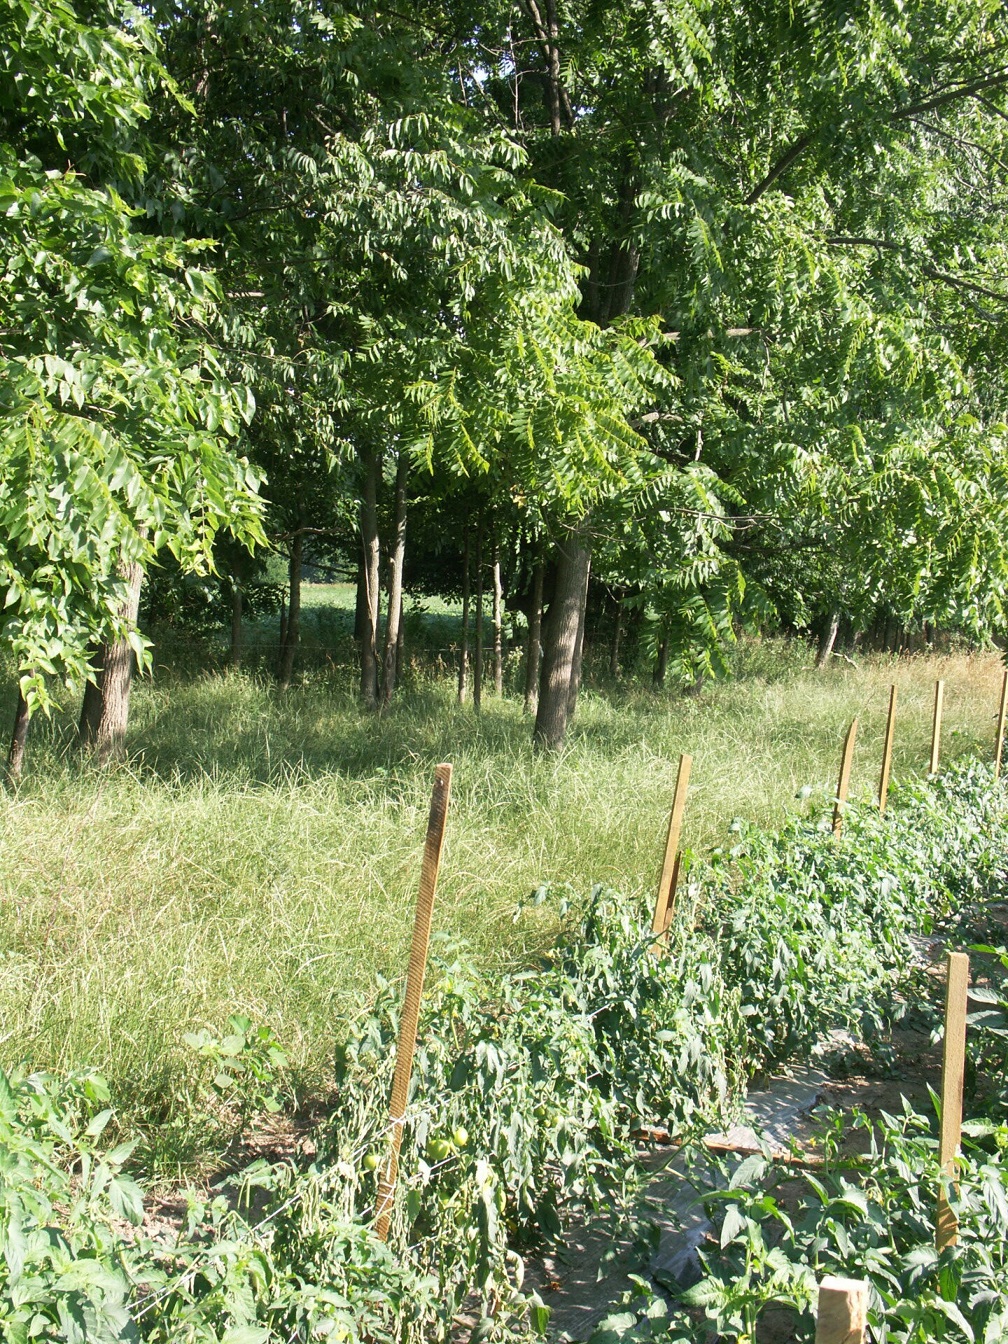 Walnut allelopathy. Note wilting tomato plants in the foreground adjacent to walnut trees